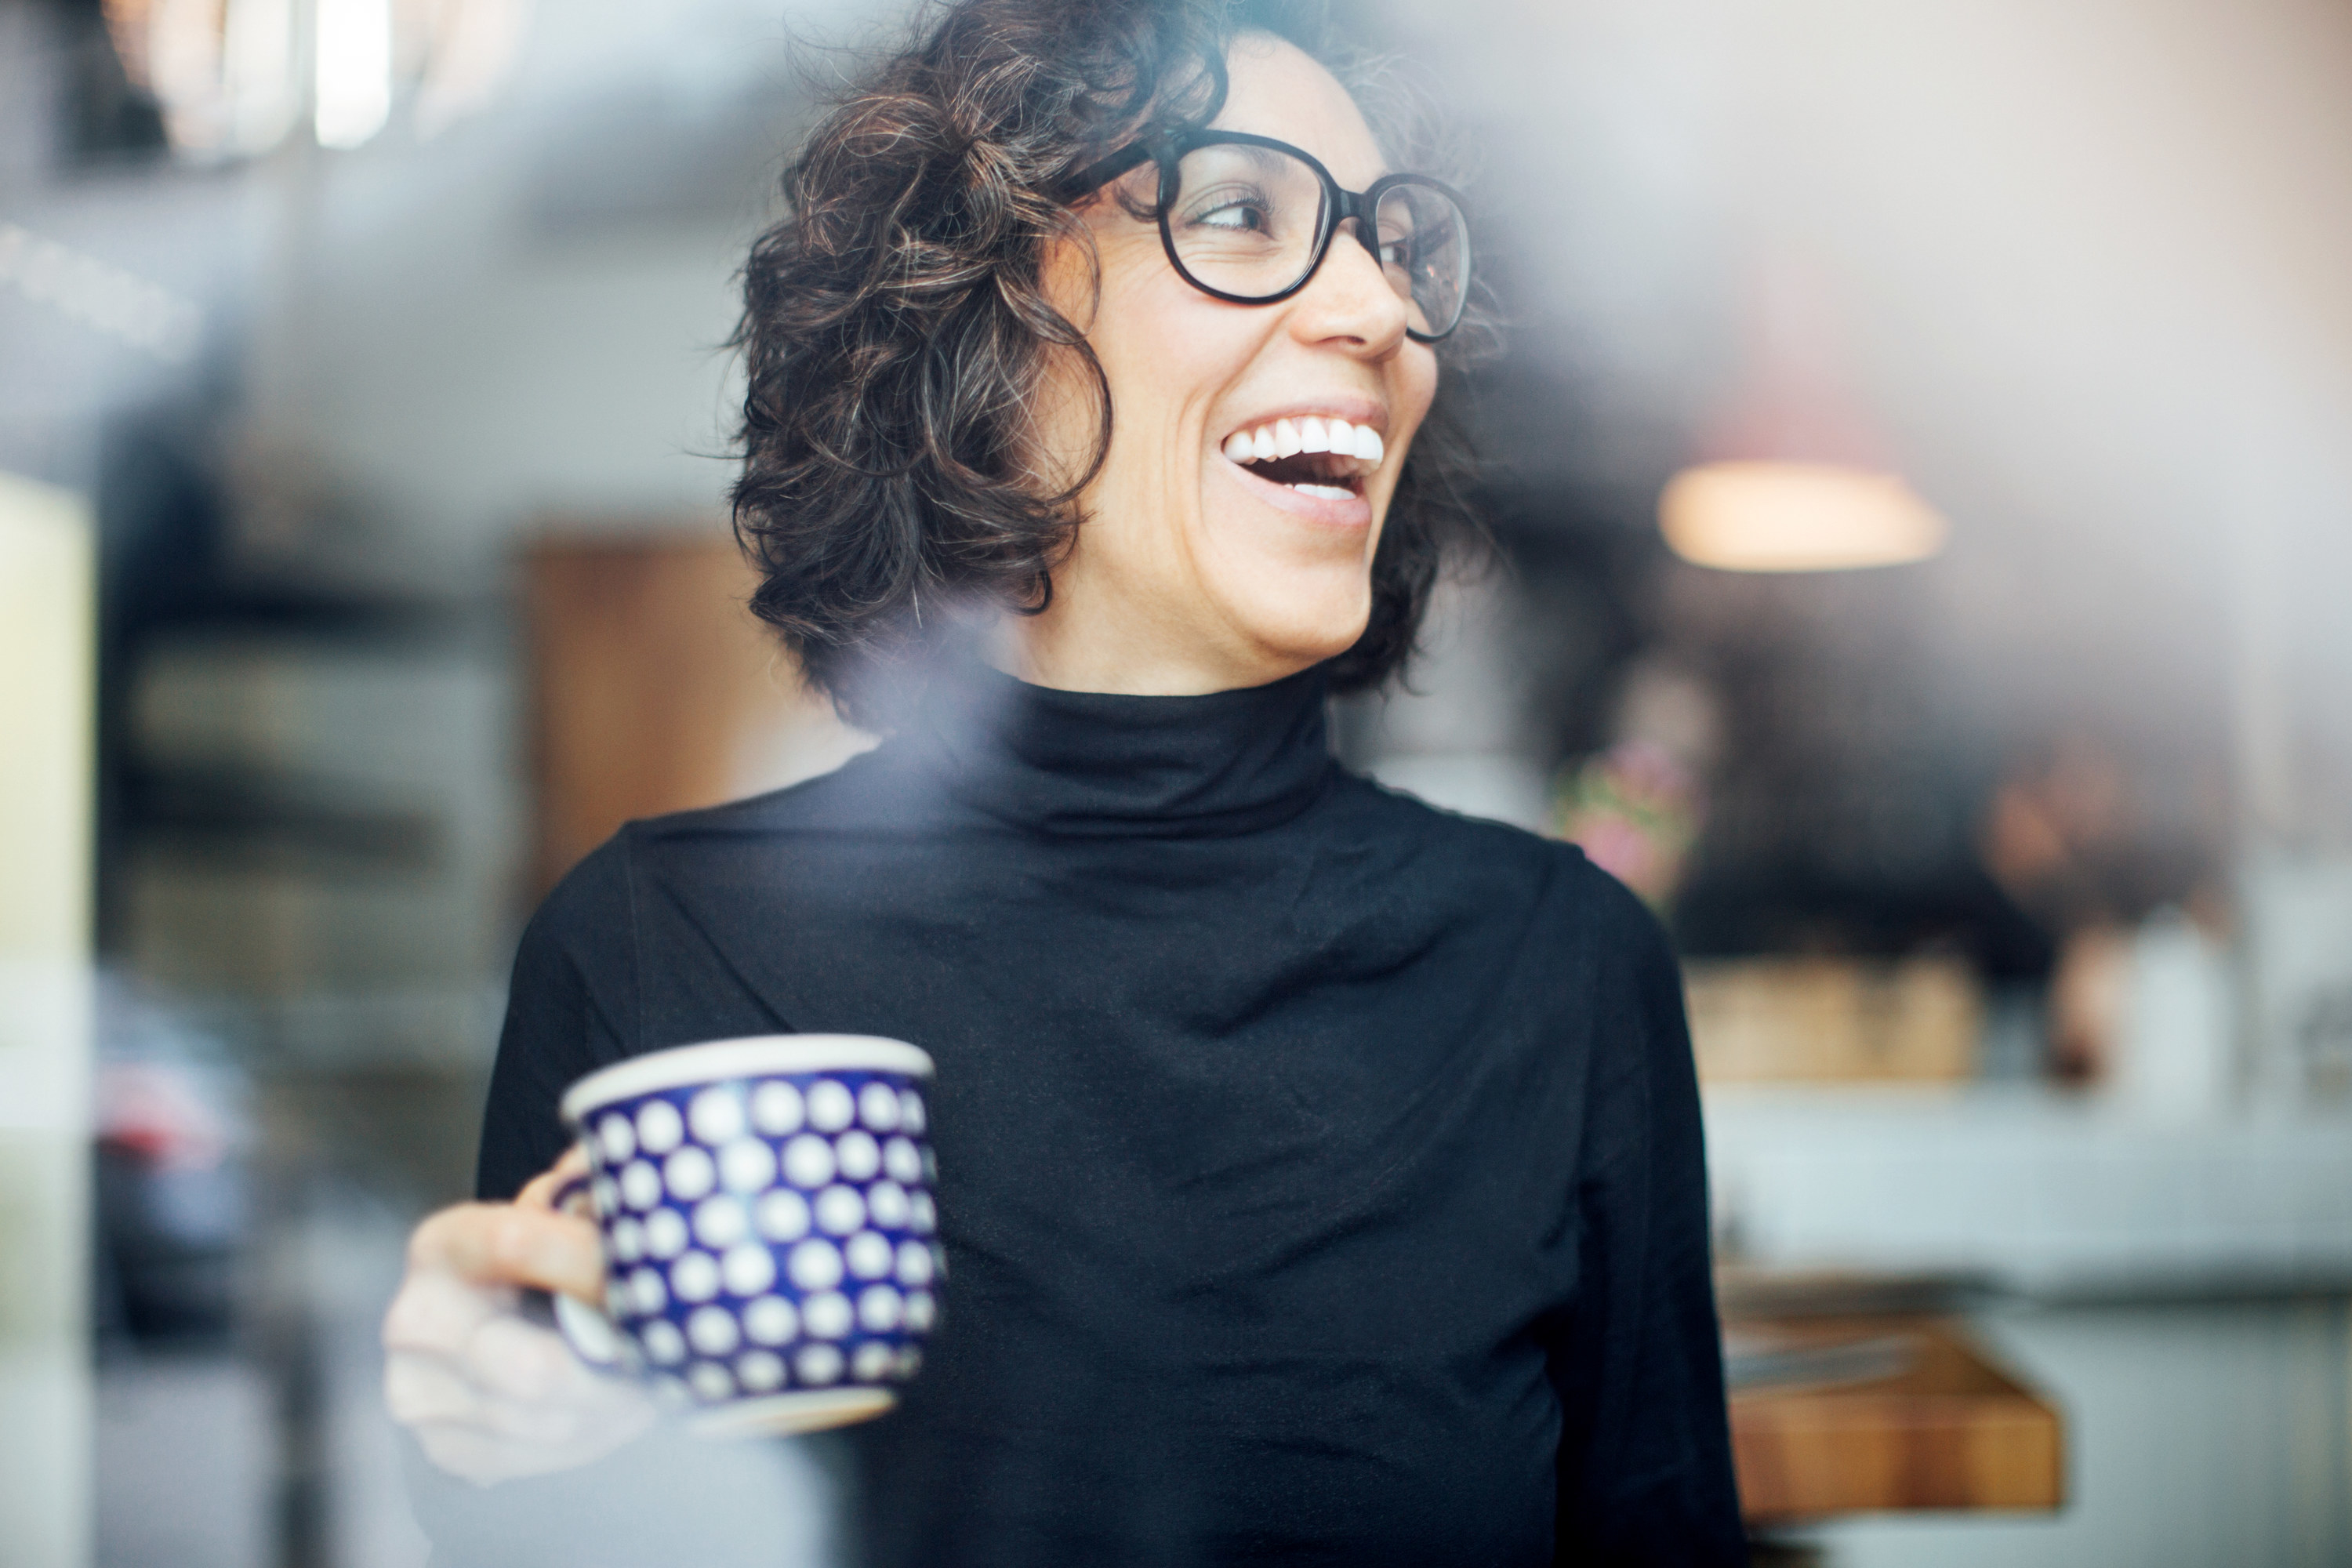 woman laughs while holding a glass mug